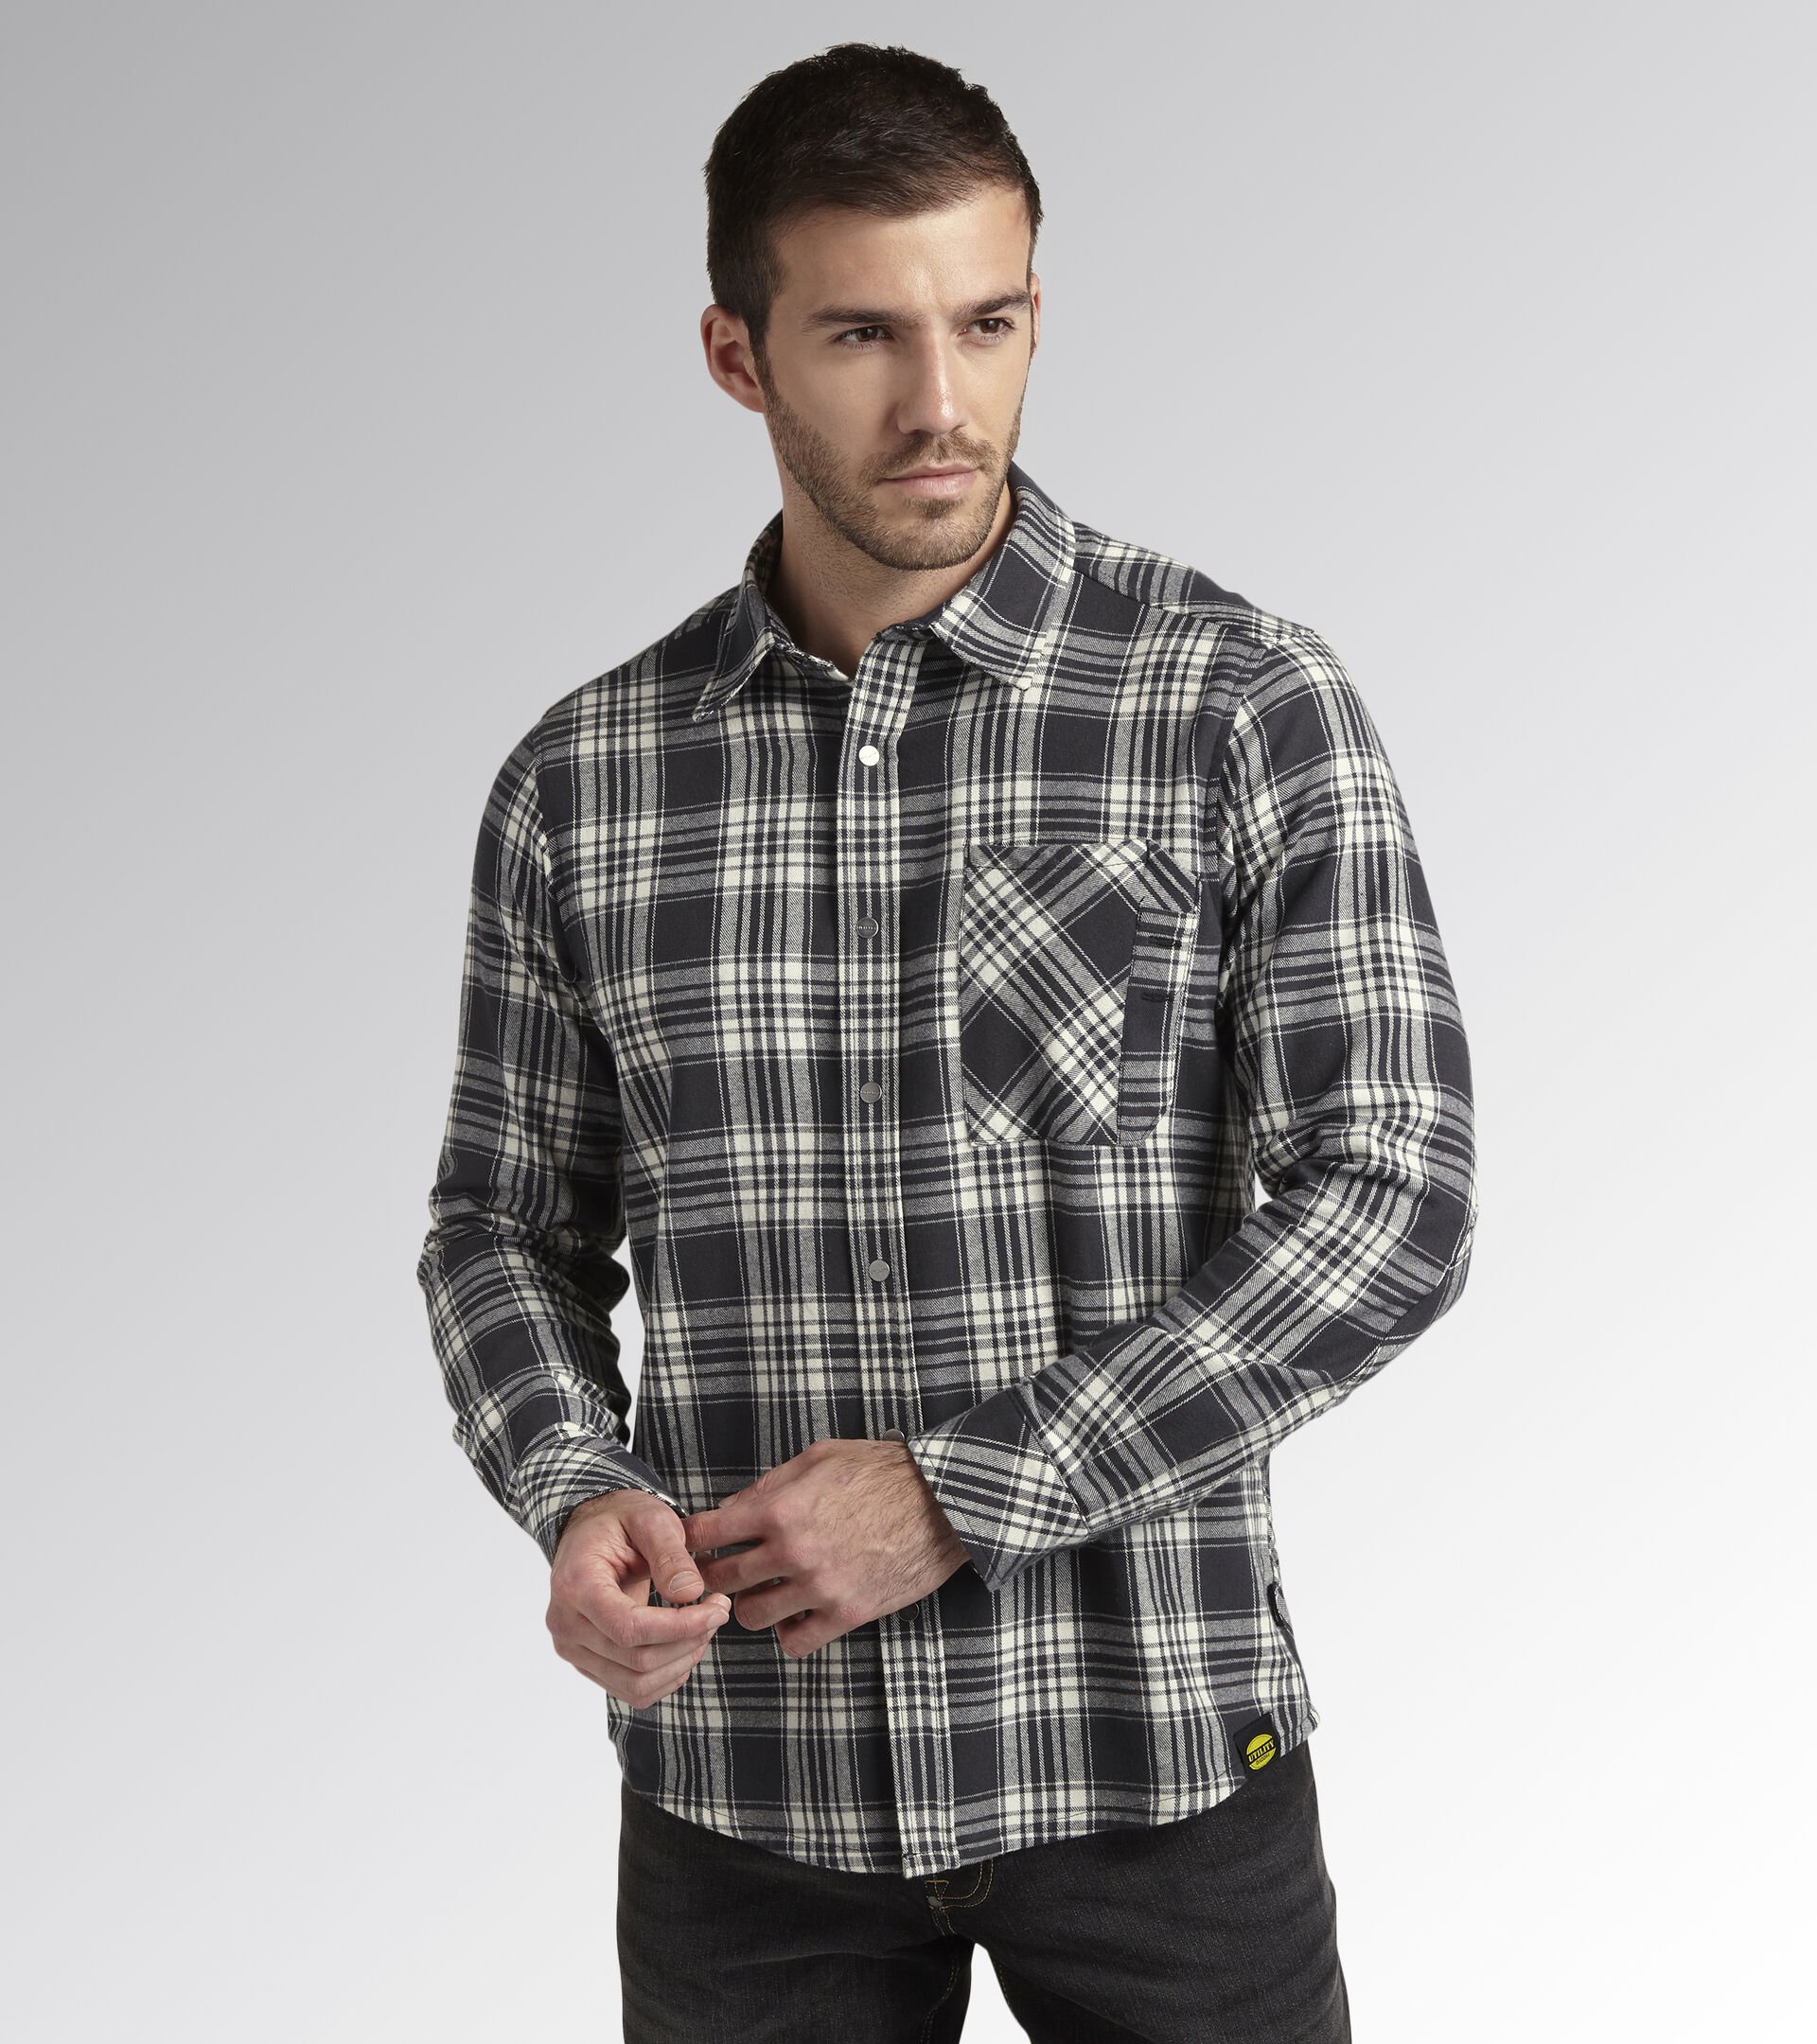 Work and safety shirt SHIRT CHECK BLACK/OFF WHITE - Utility